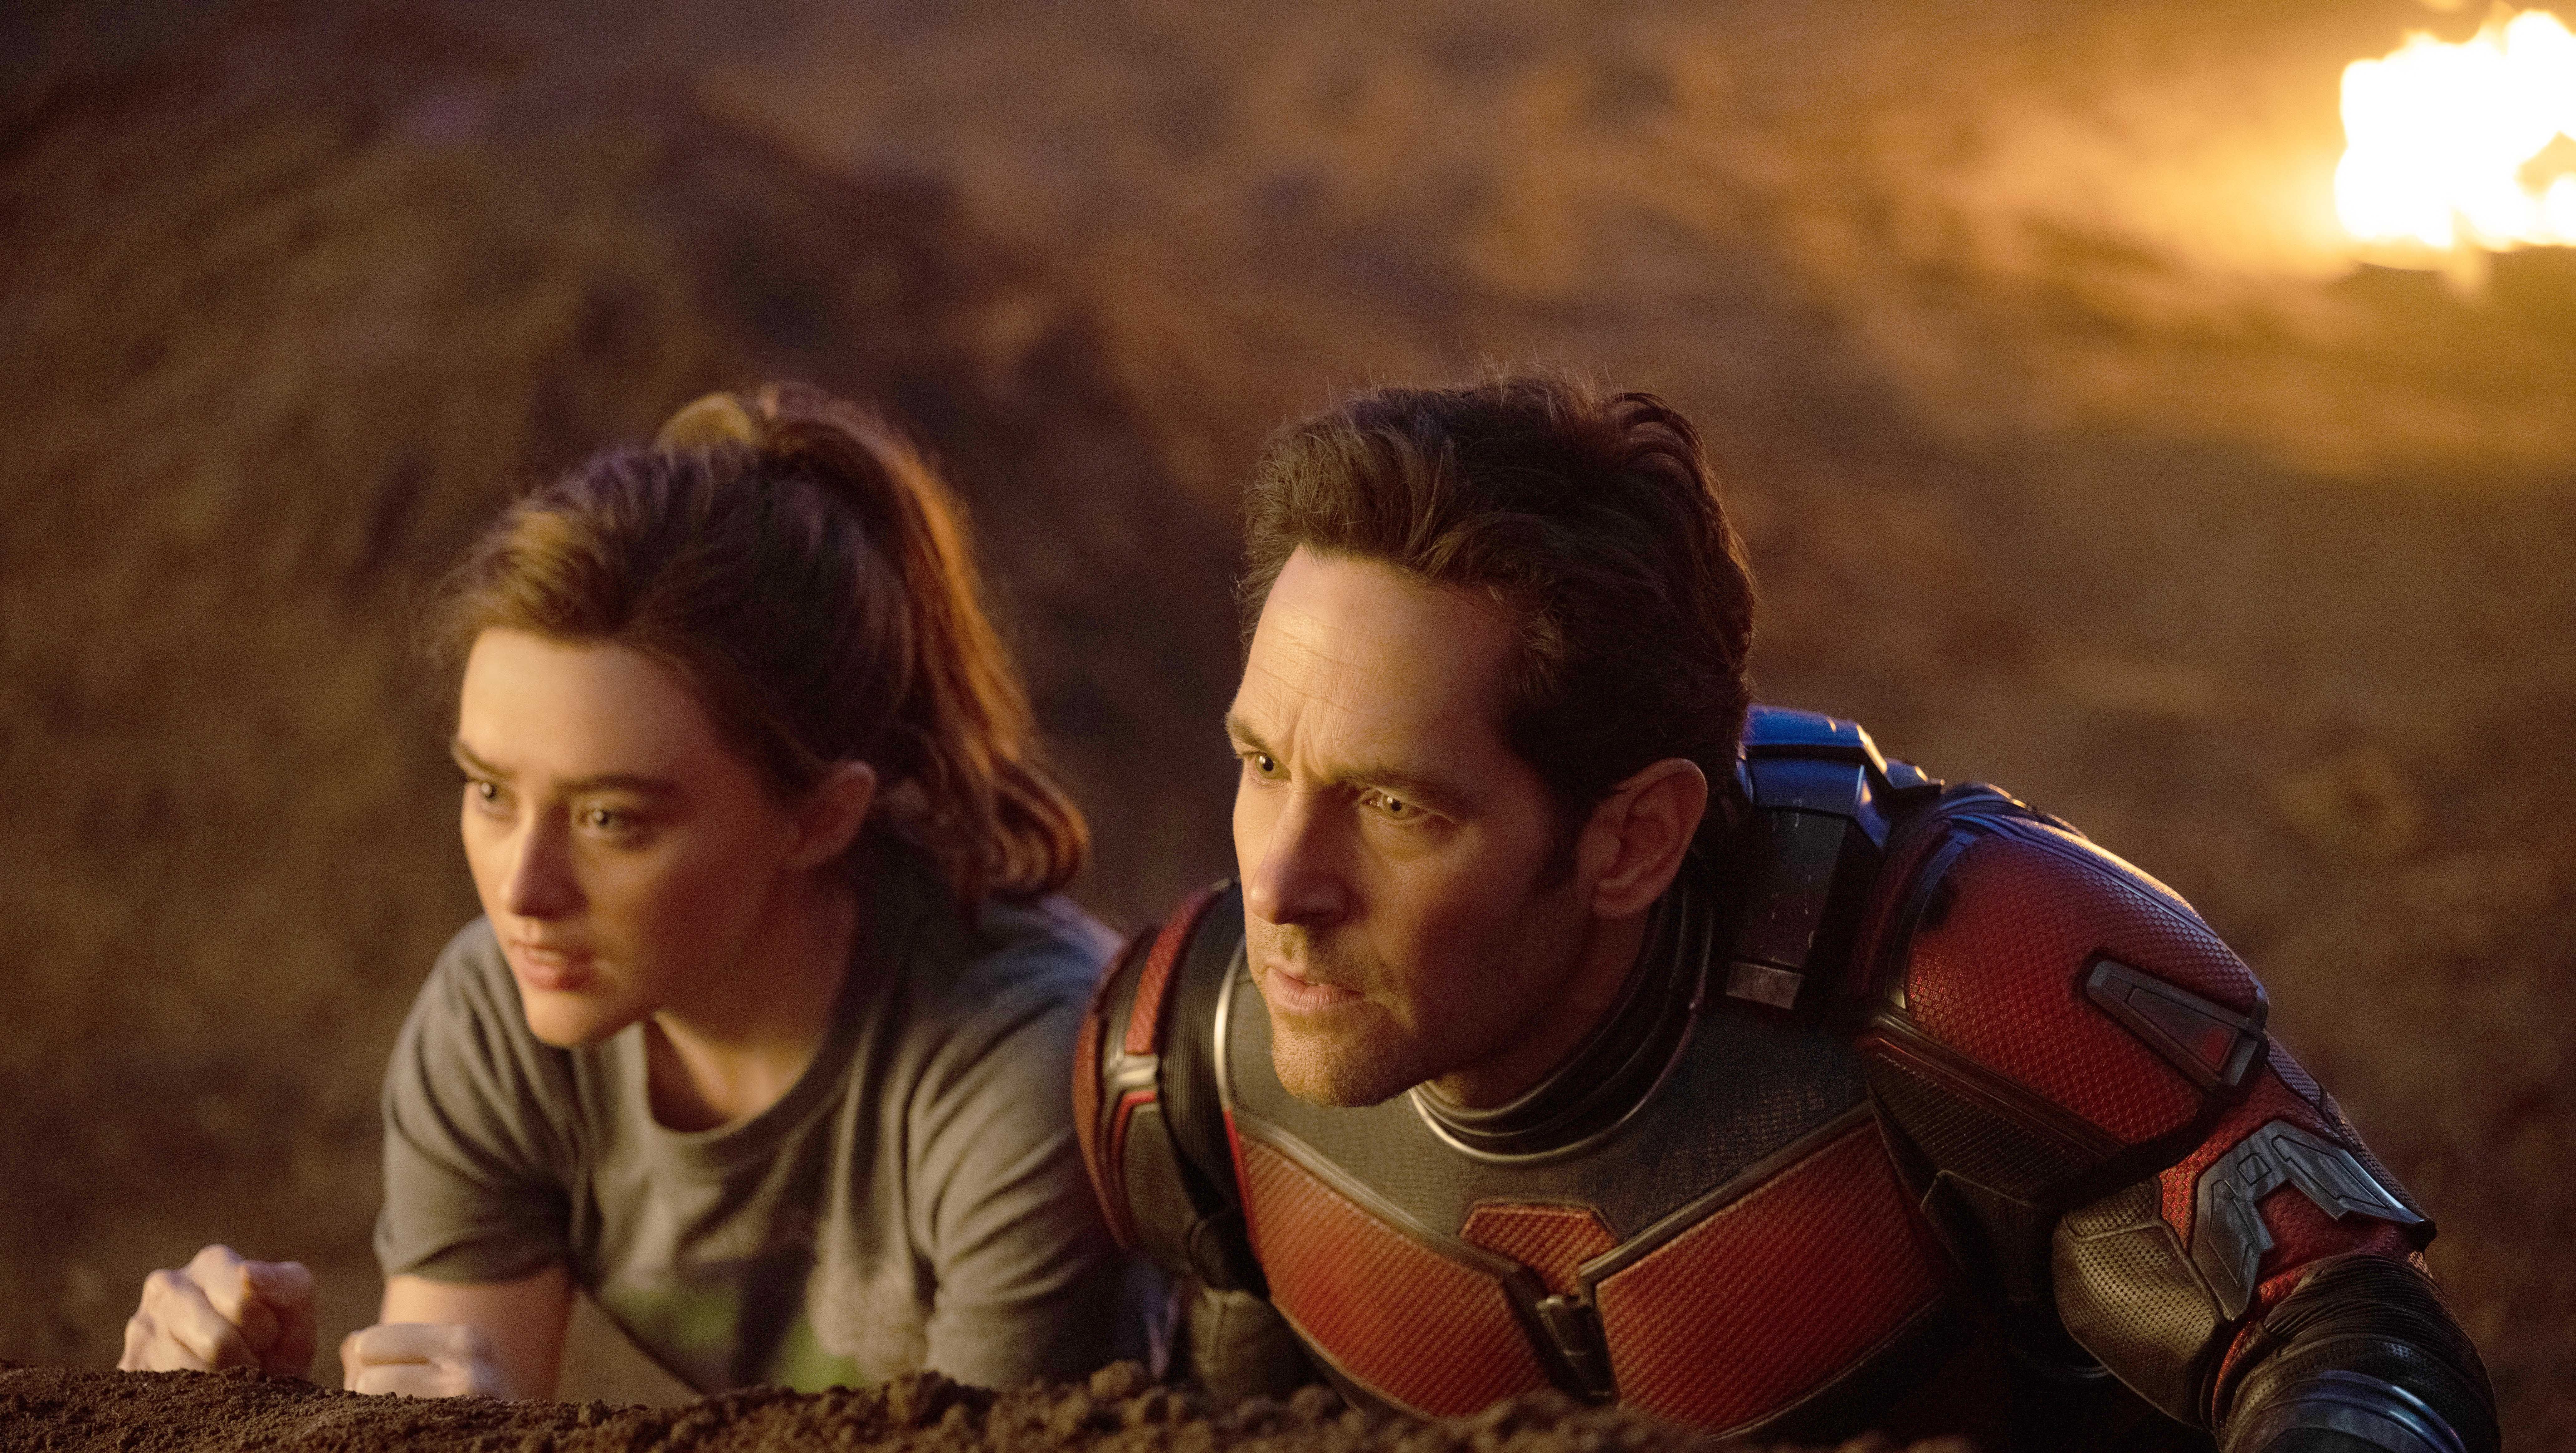 Ant-Man 3 Suffers After Huge Box Office Debut. What Happened?